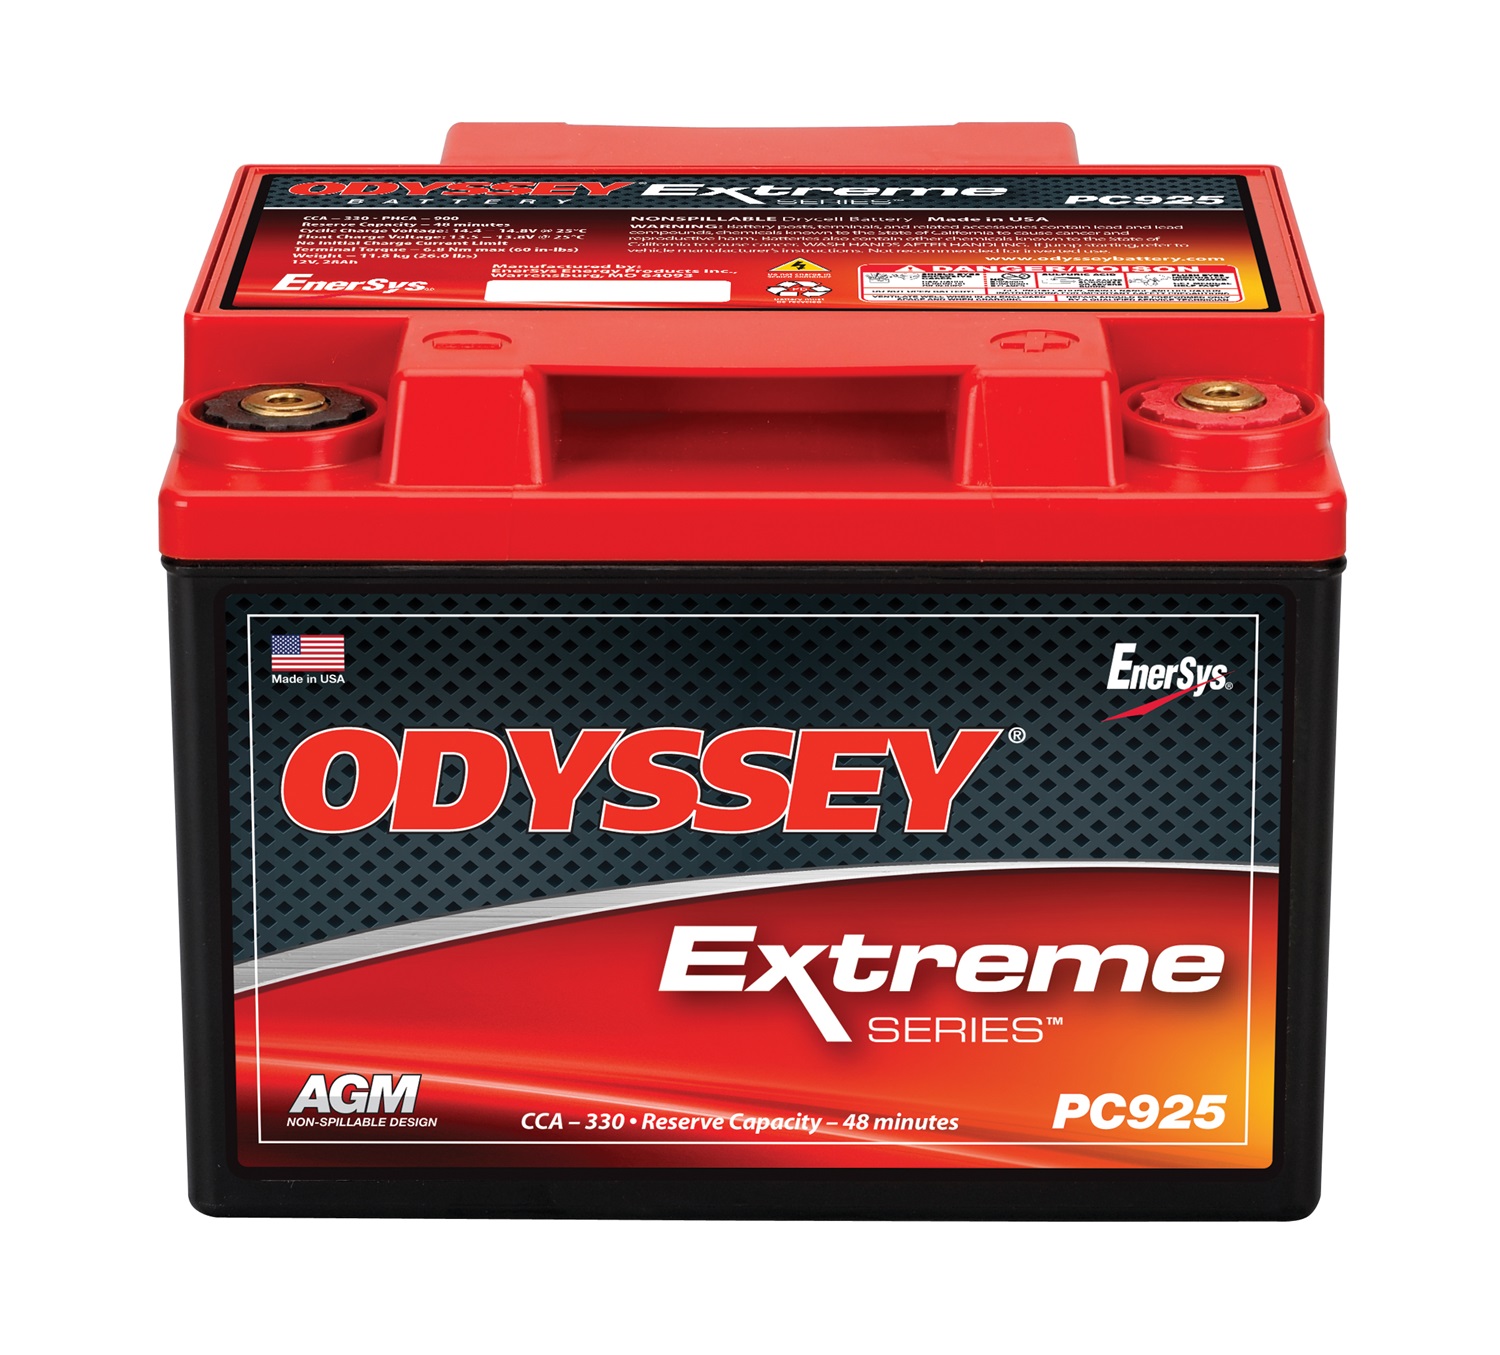 ODYSSEY Extreme Battery - ODS-AGM28L (PC925) - image 1 of 4